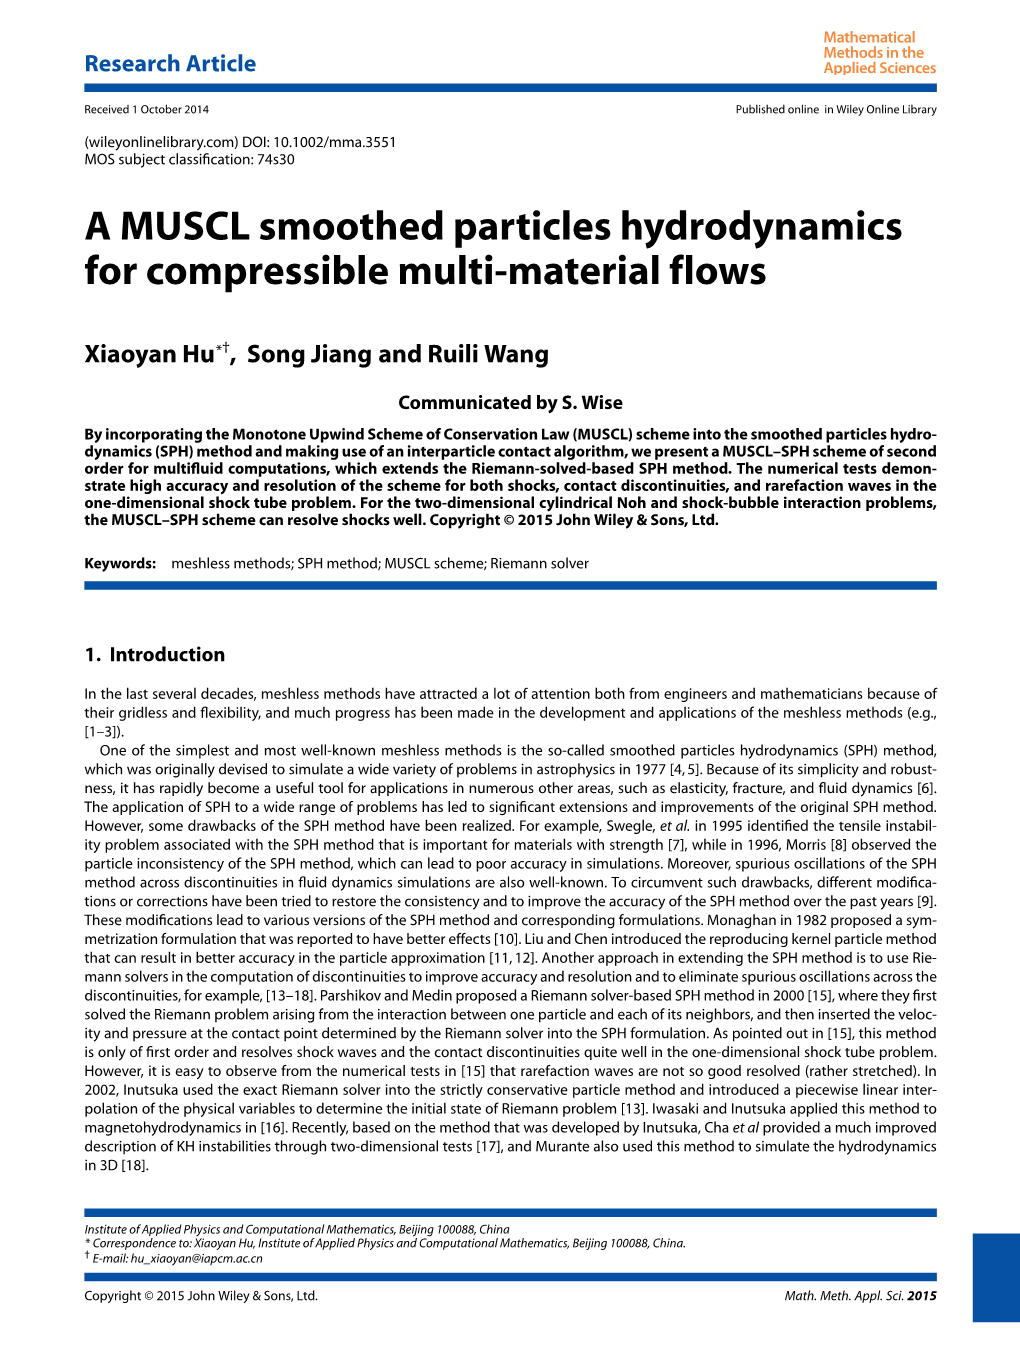 A MUSCL Smoothed Particles Hydrodynamics for Compressible Multi-Material Flows